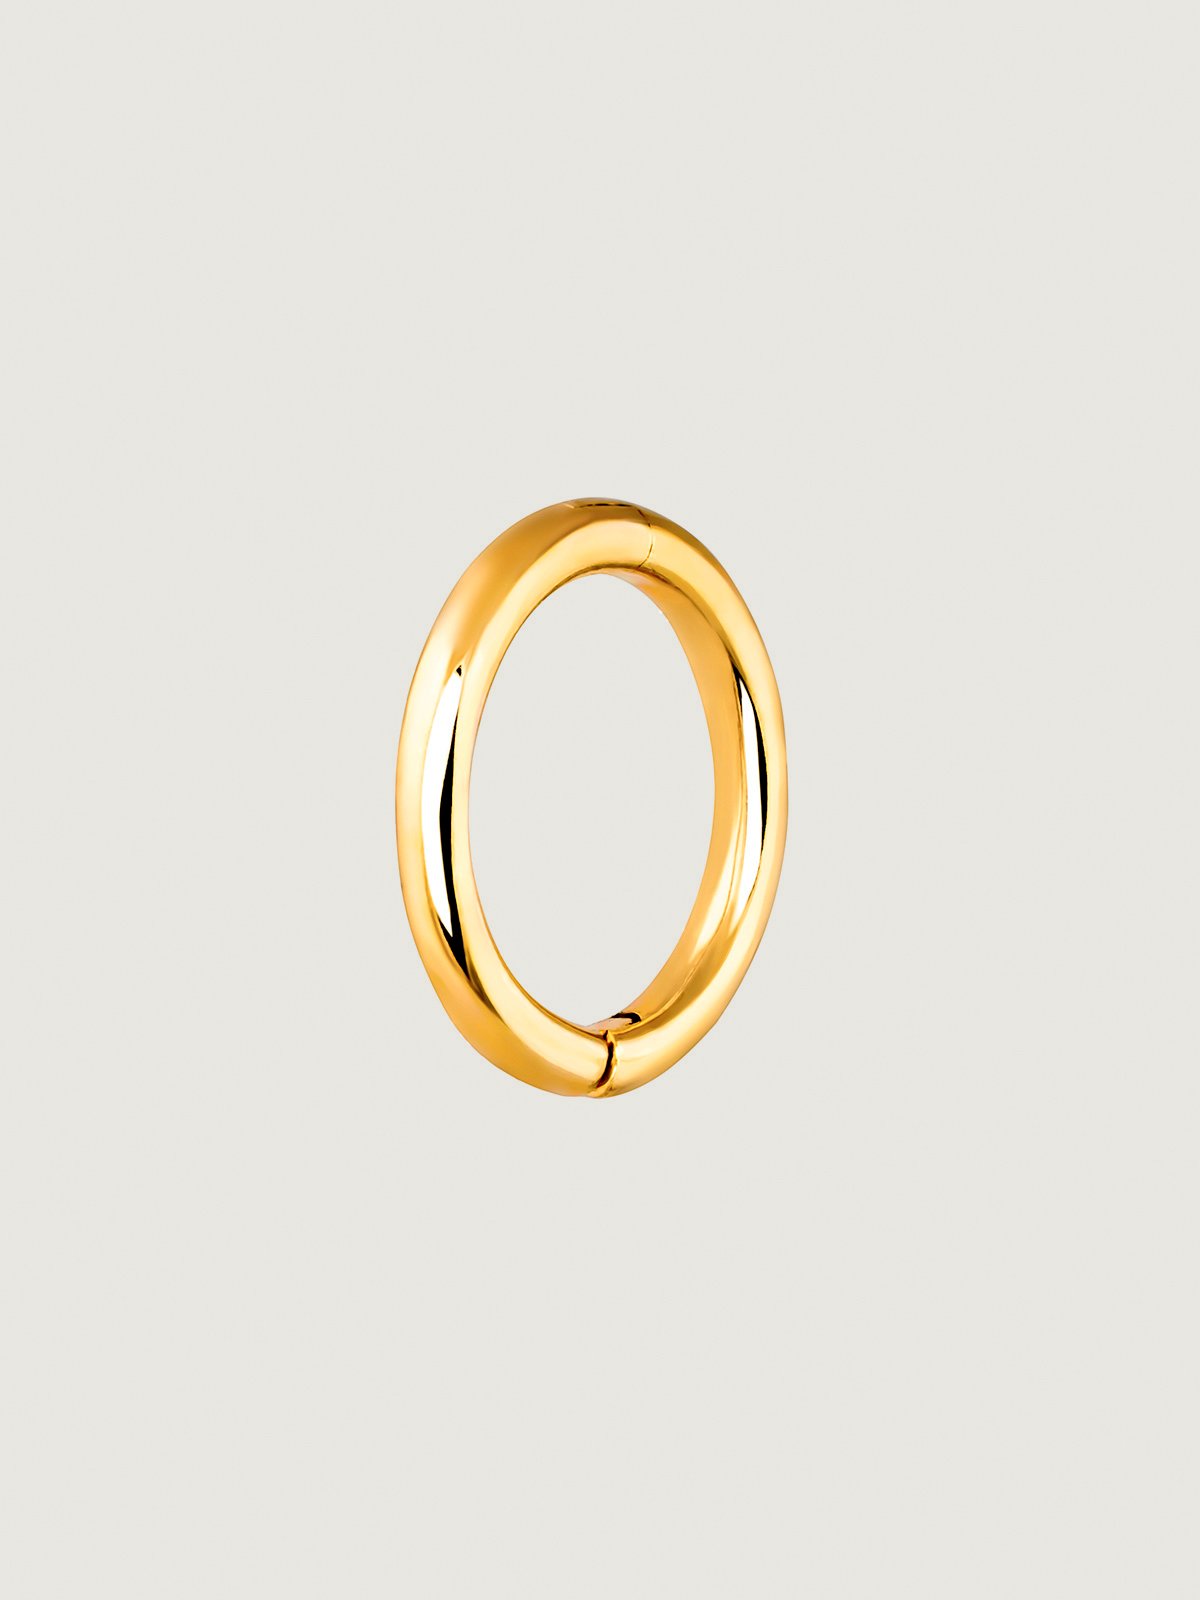 Small individual 9K yellow gold hoop earring.